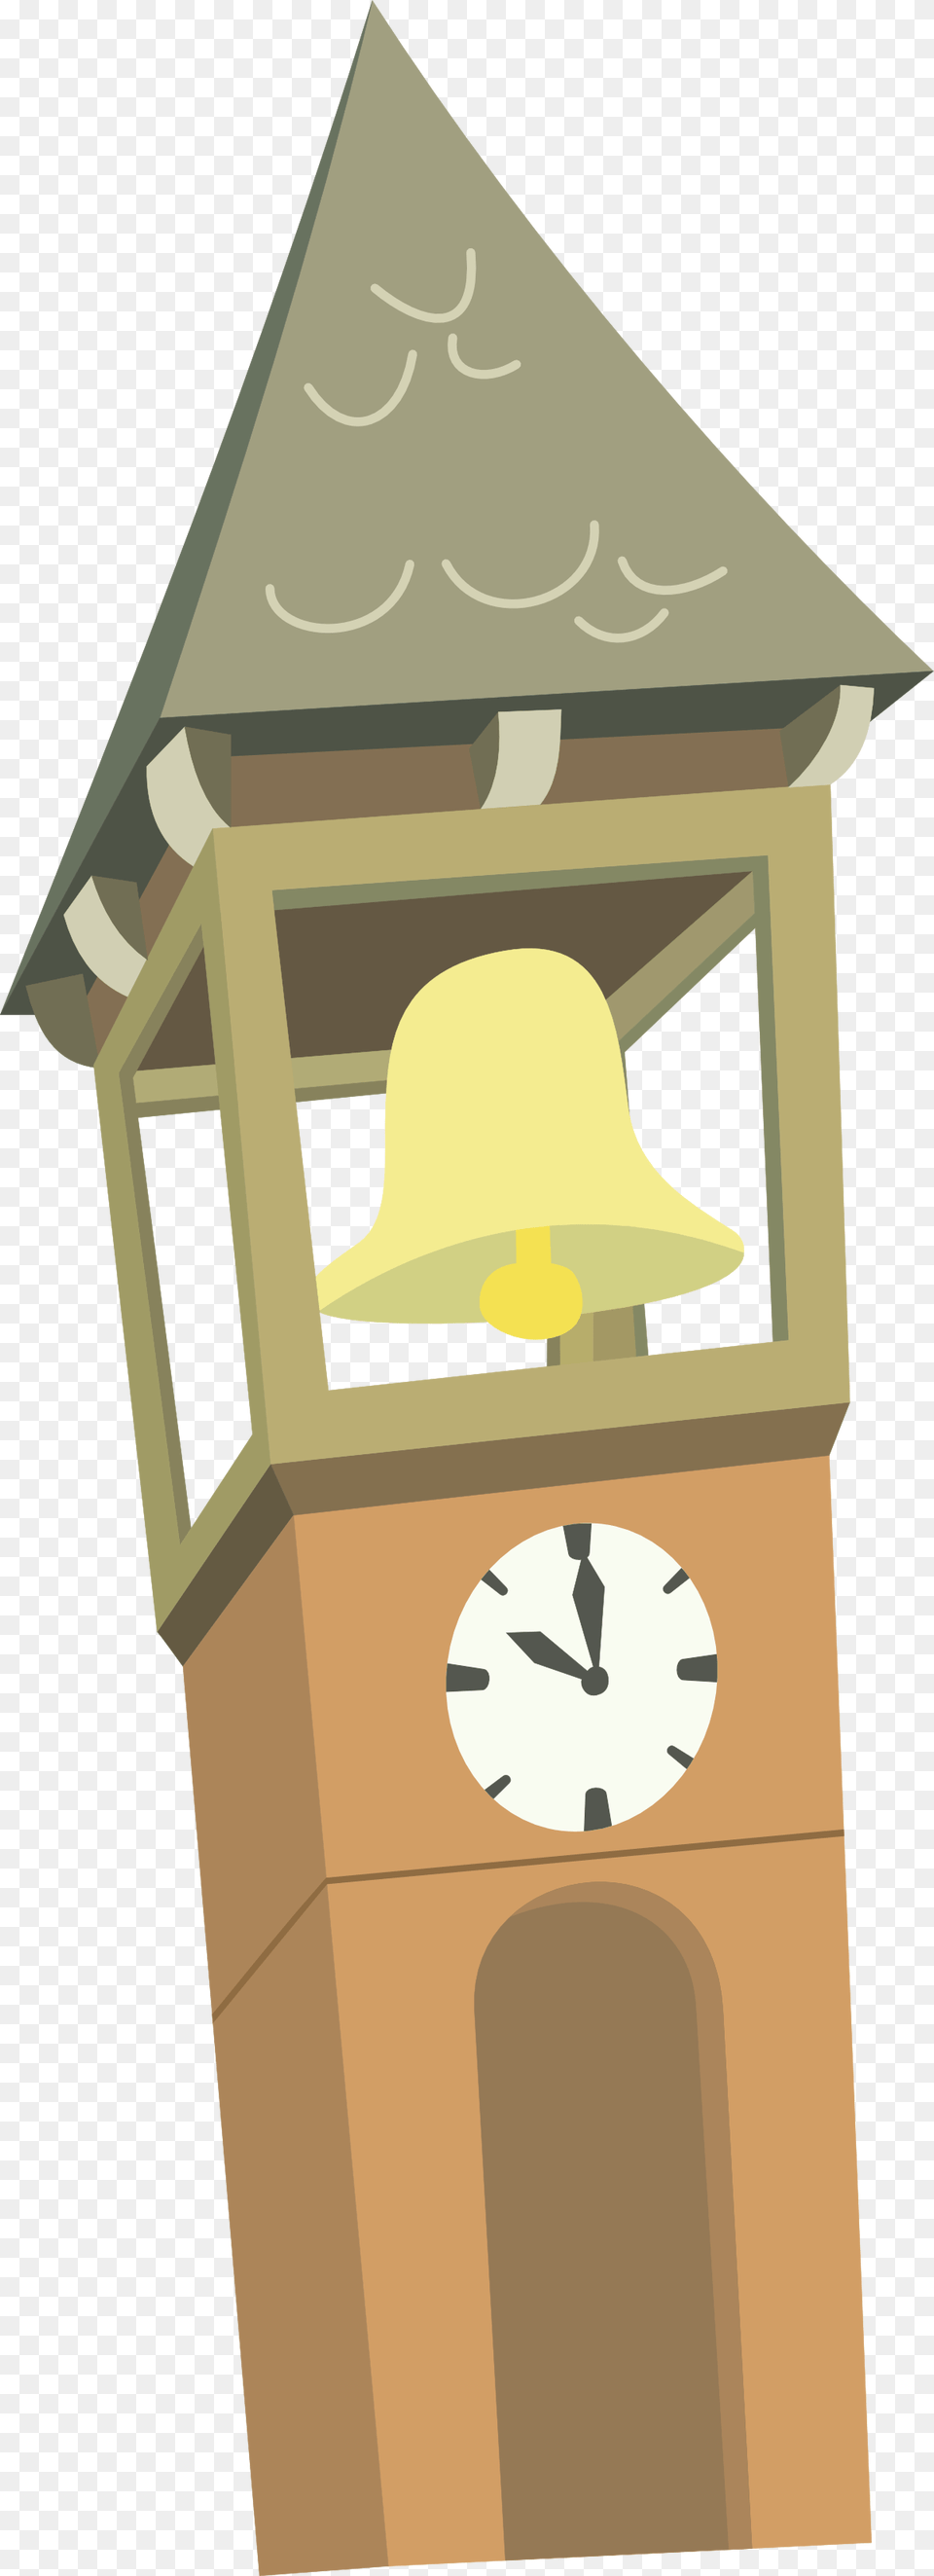 Images Of Big Ben Cartoon Clock Tower, Architecture, Bell Tower, Building, Clock Tower Free Transparent Png